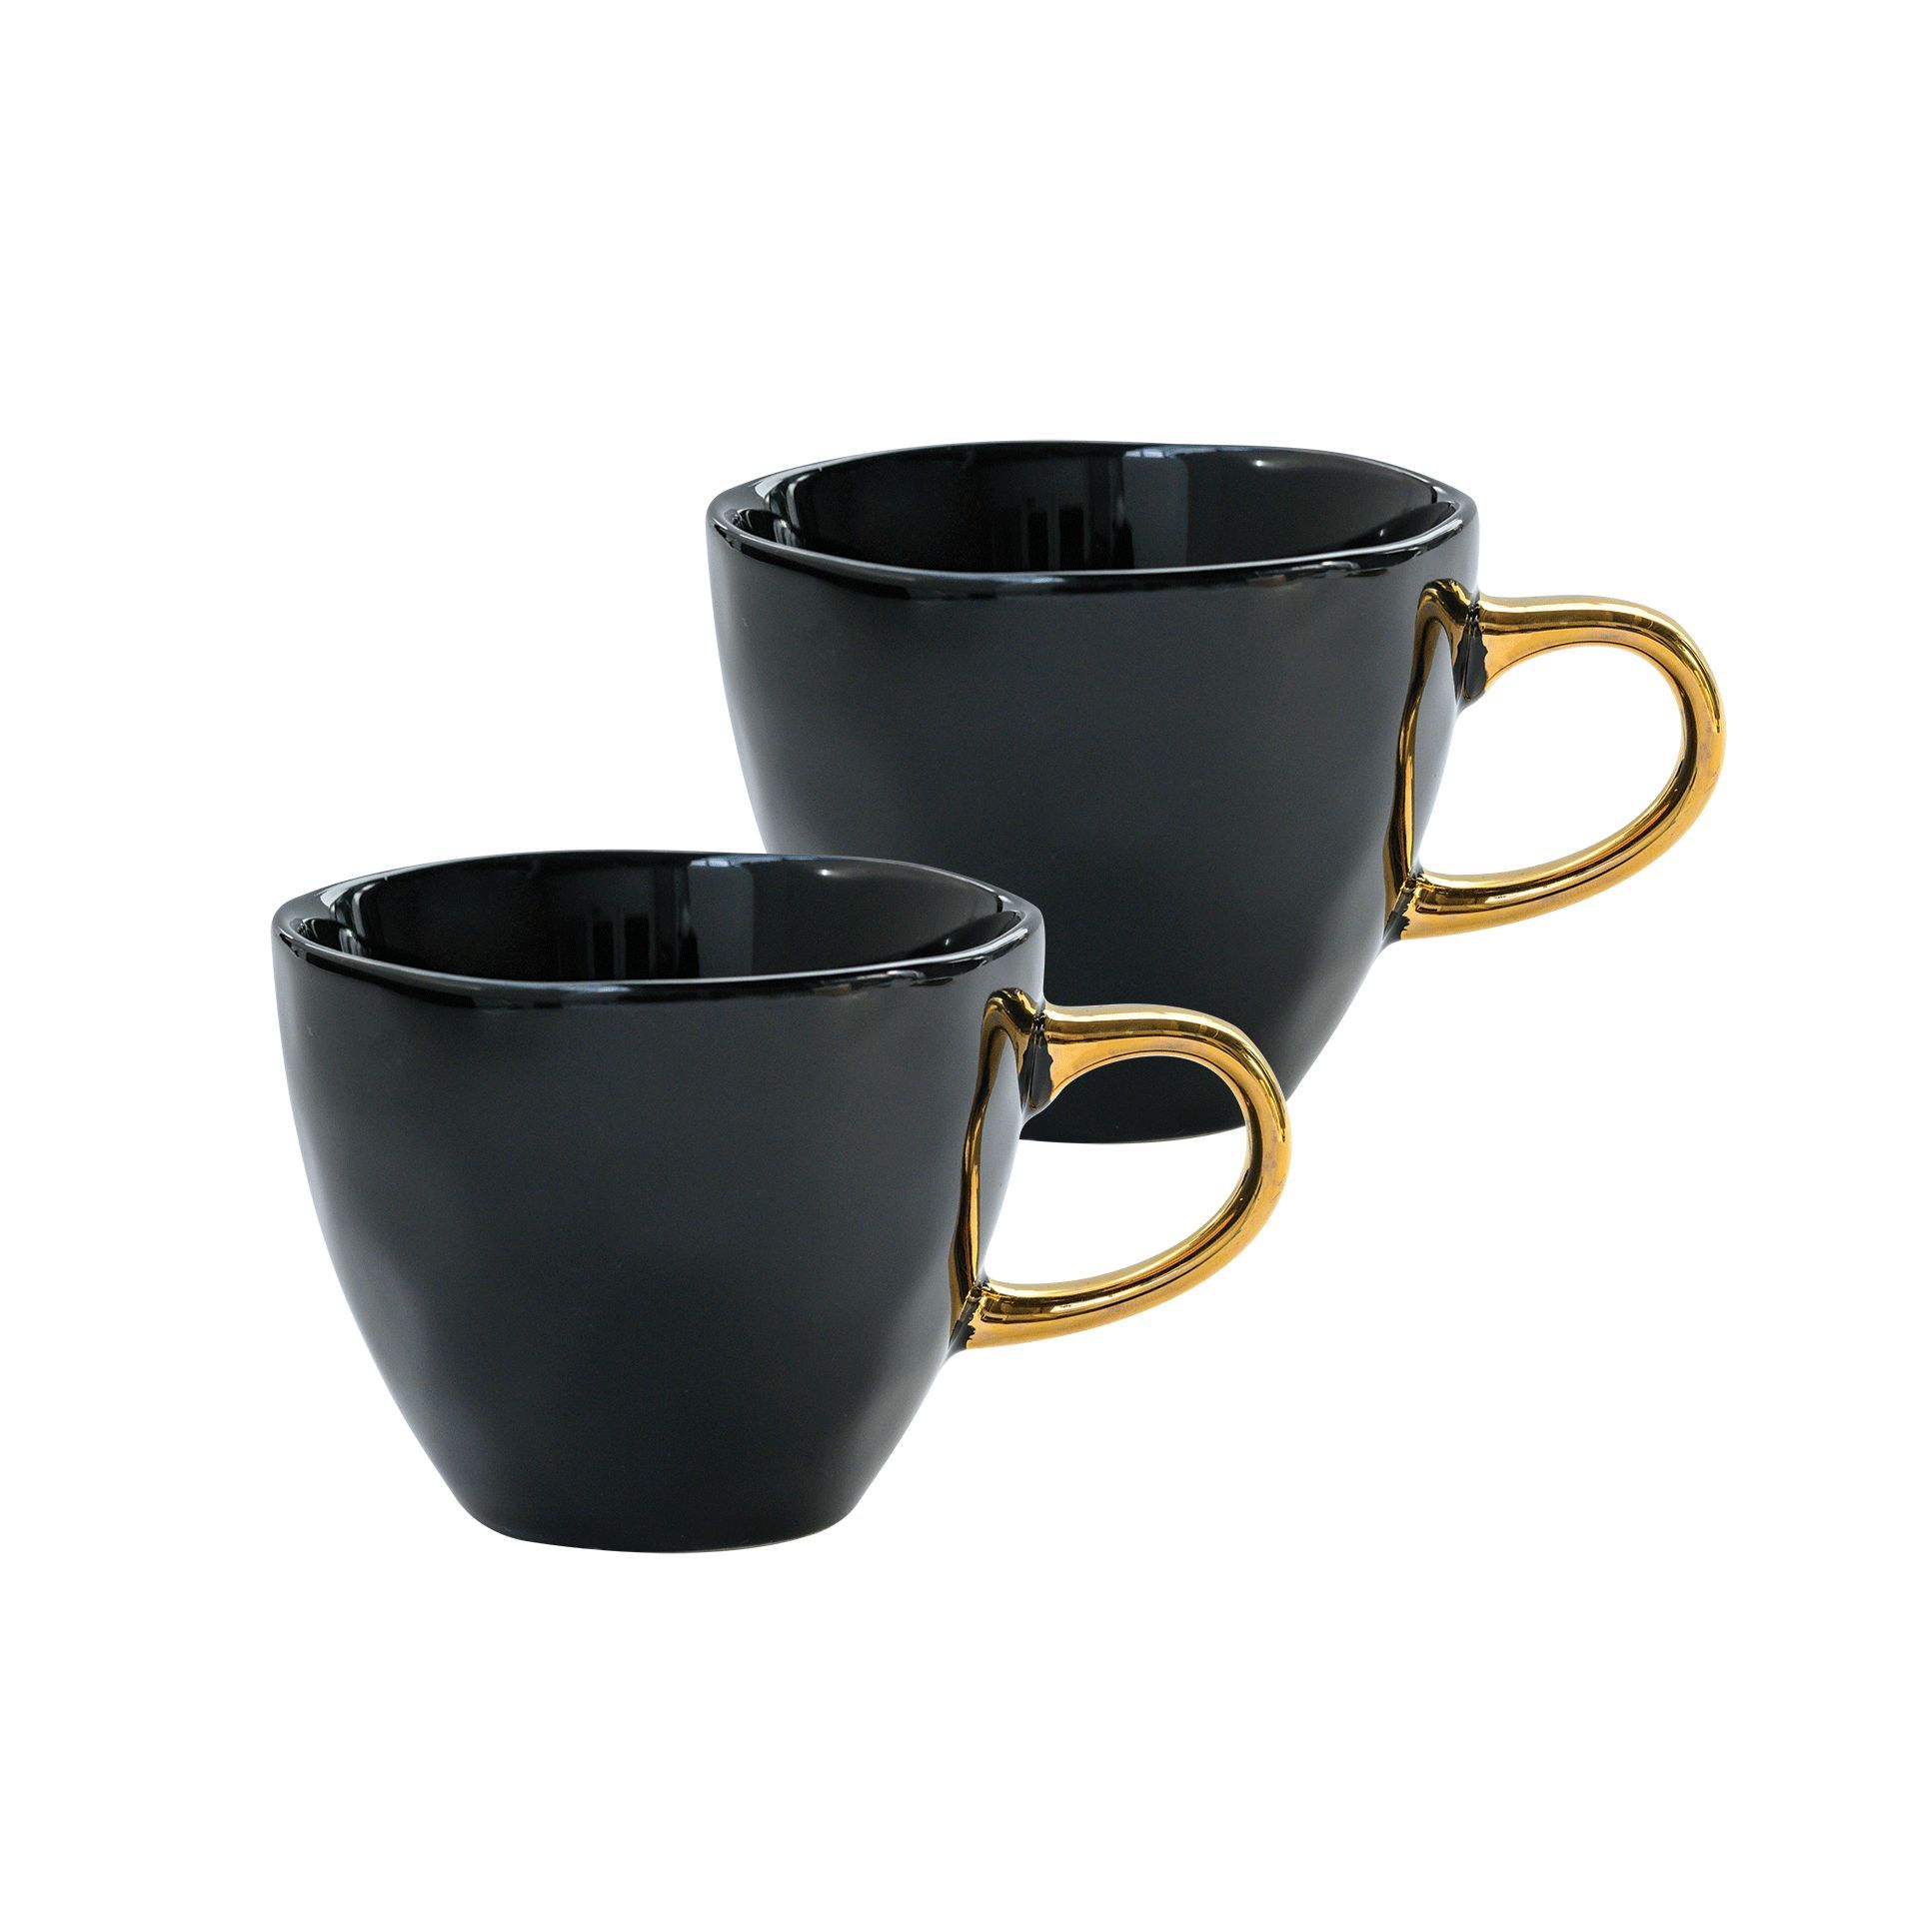 Unc Good Morning Cup Mini S/2 In Giftpack Black Gift